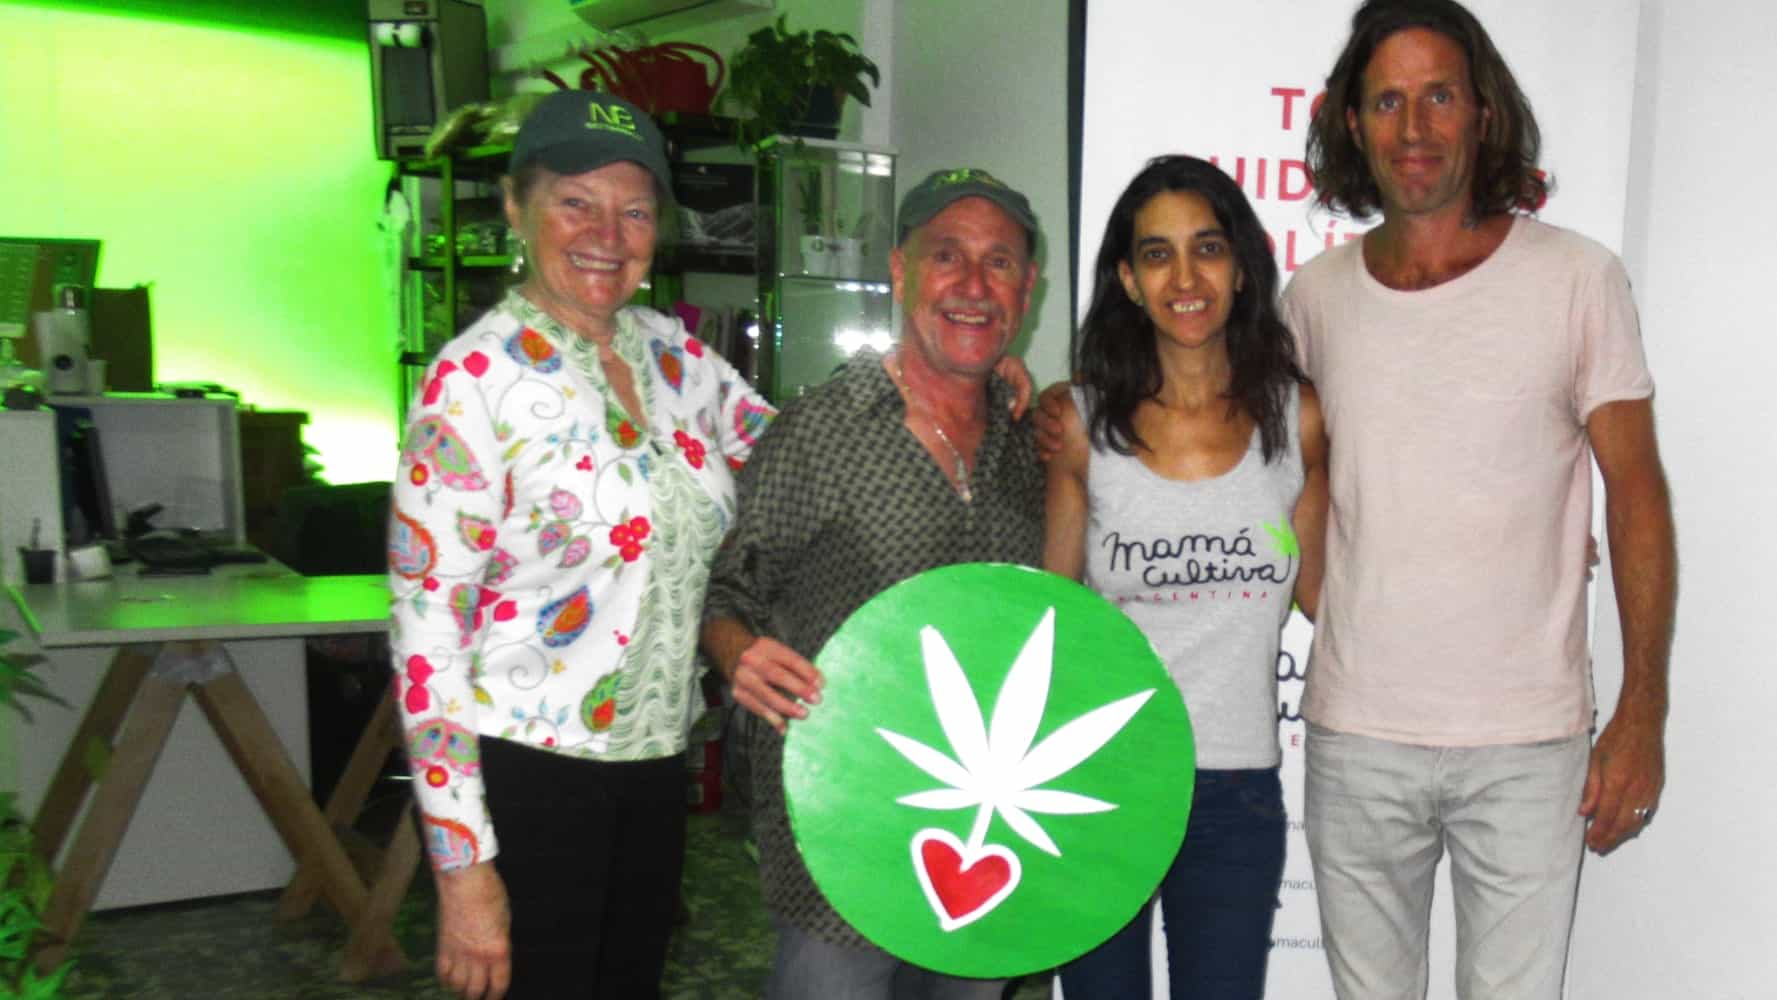 San Diego Video Producers Patty Mooney and Mark Schulze Fighting Cancer with Cannabis